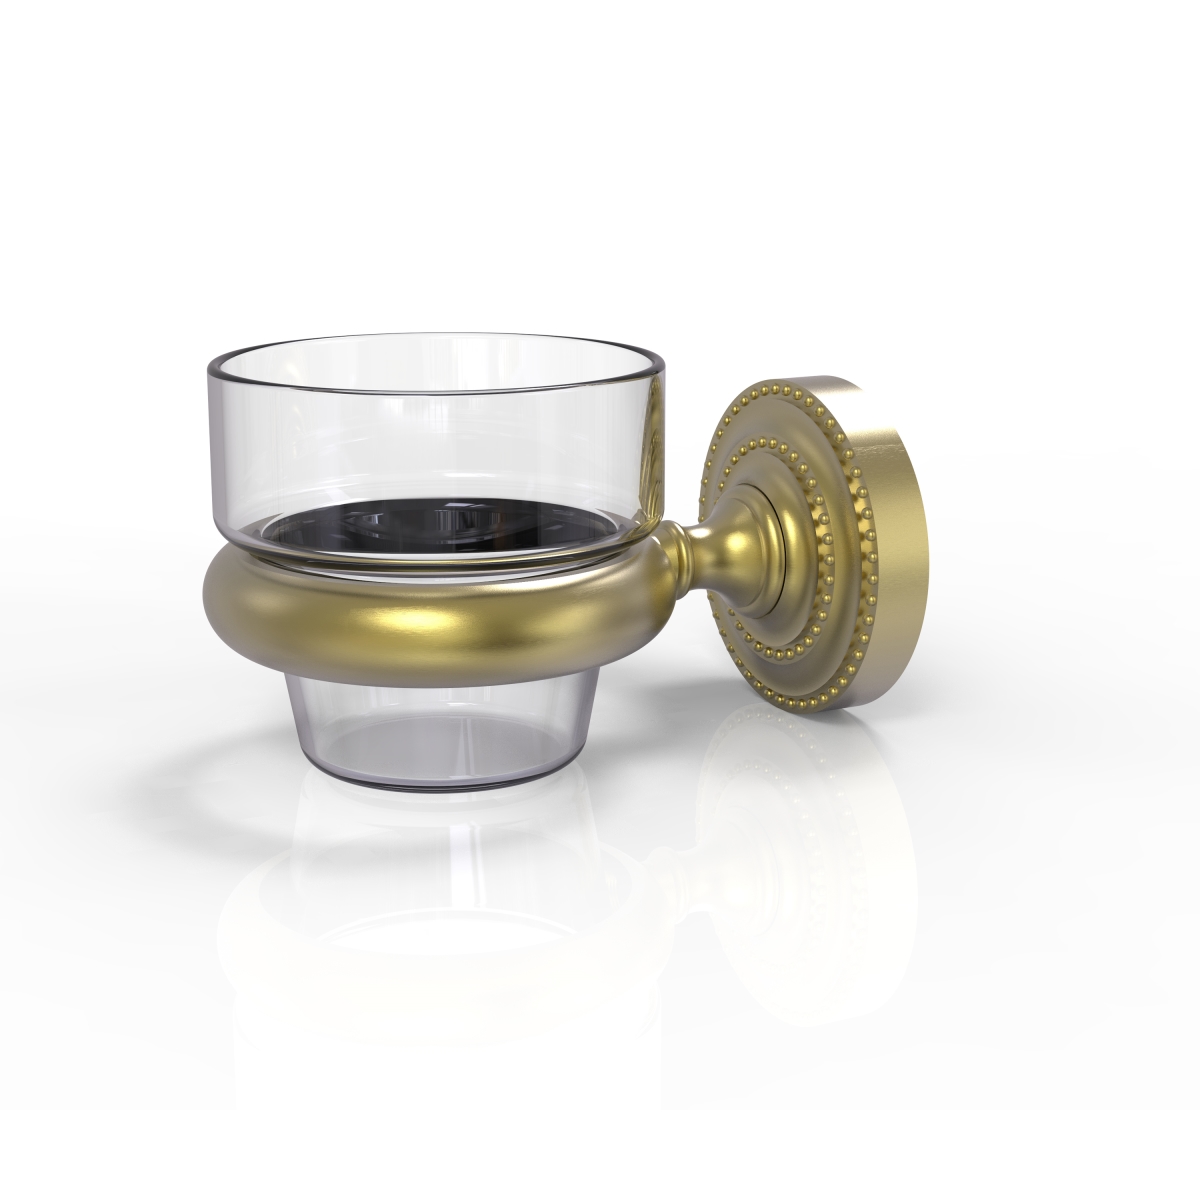 Picture of Allied Brass DT-64-SBR Dottingham Collection Wall Mounted Votive Candle Holder, Satin Brass